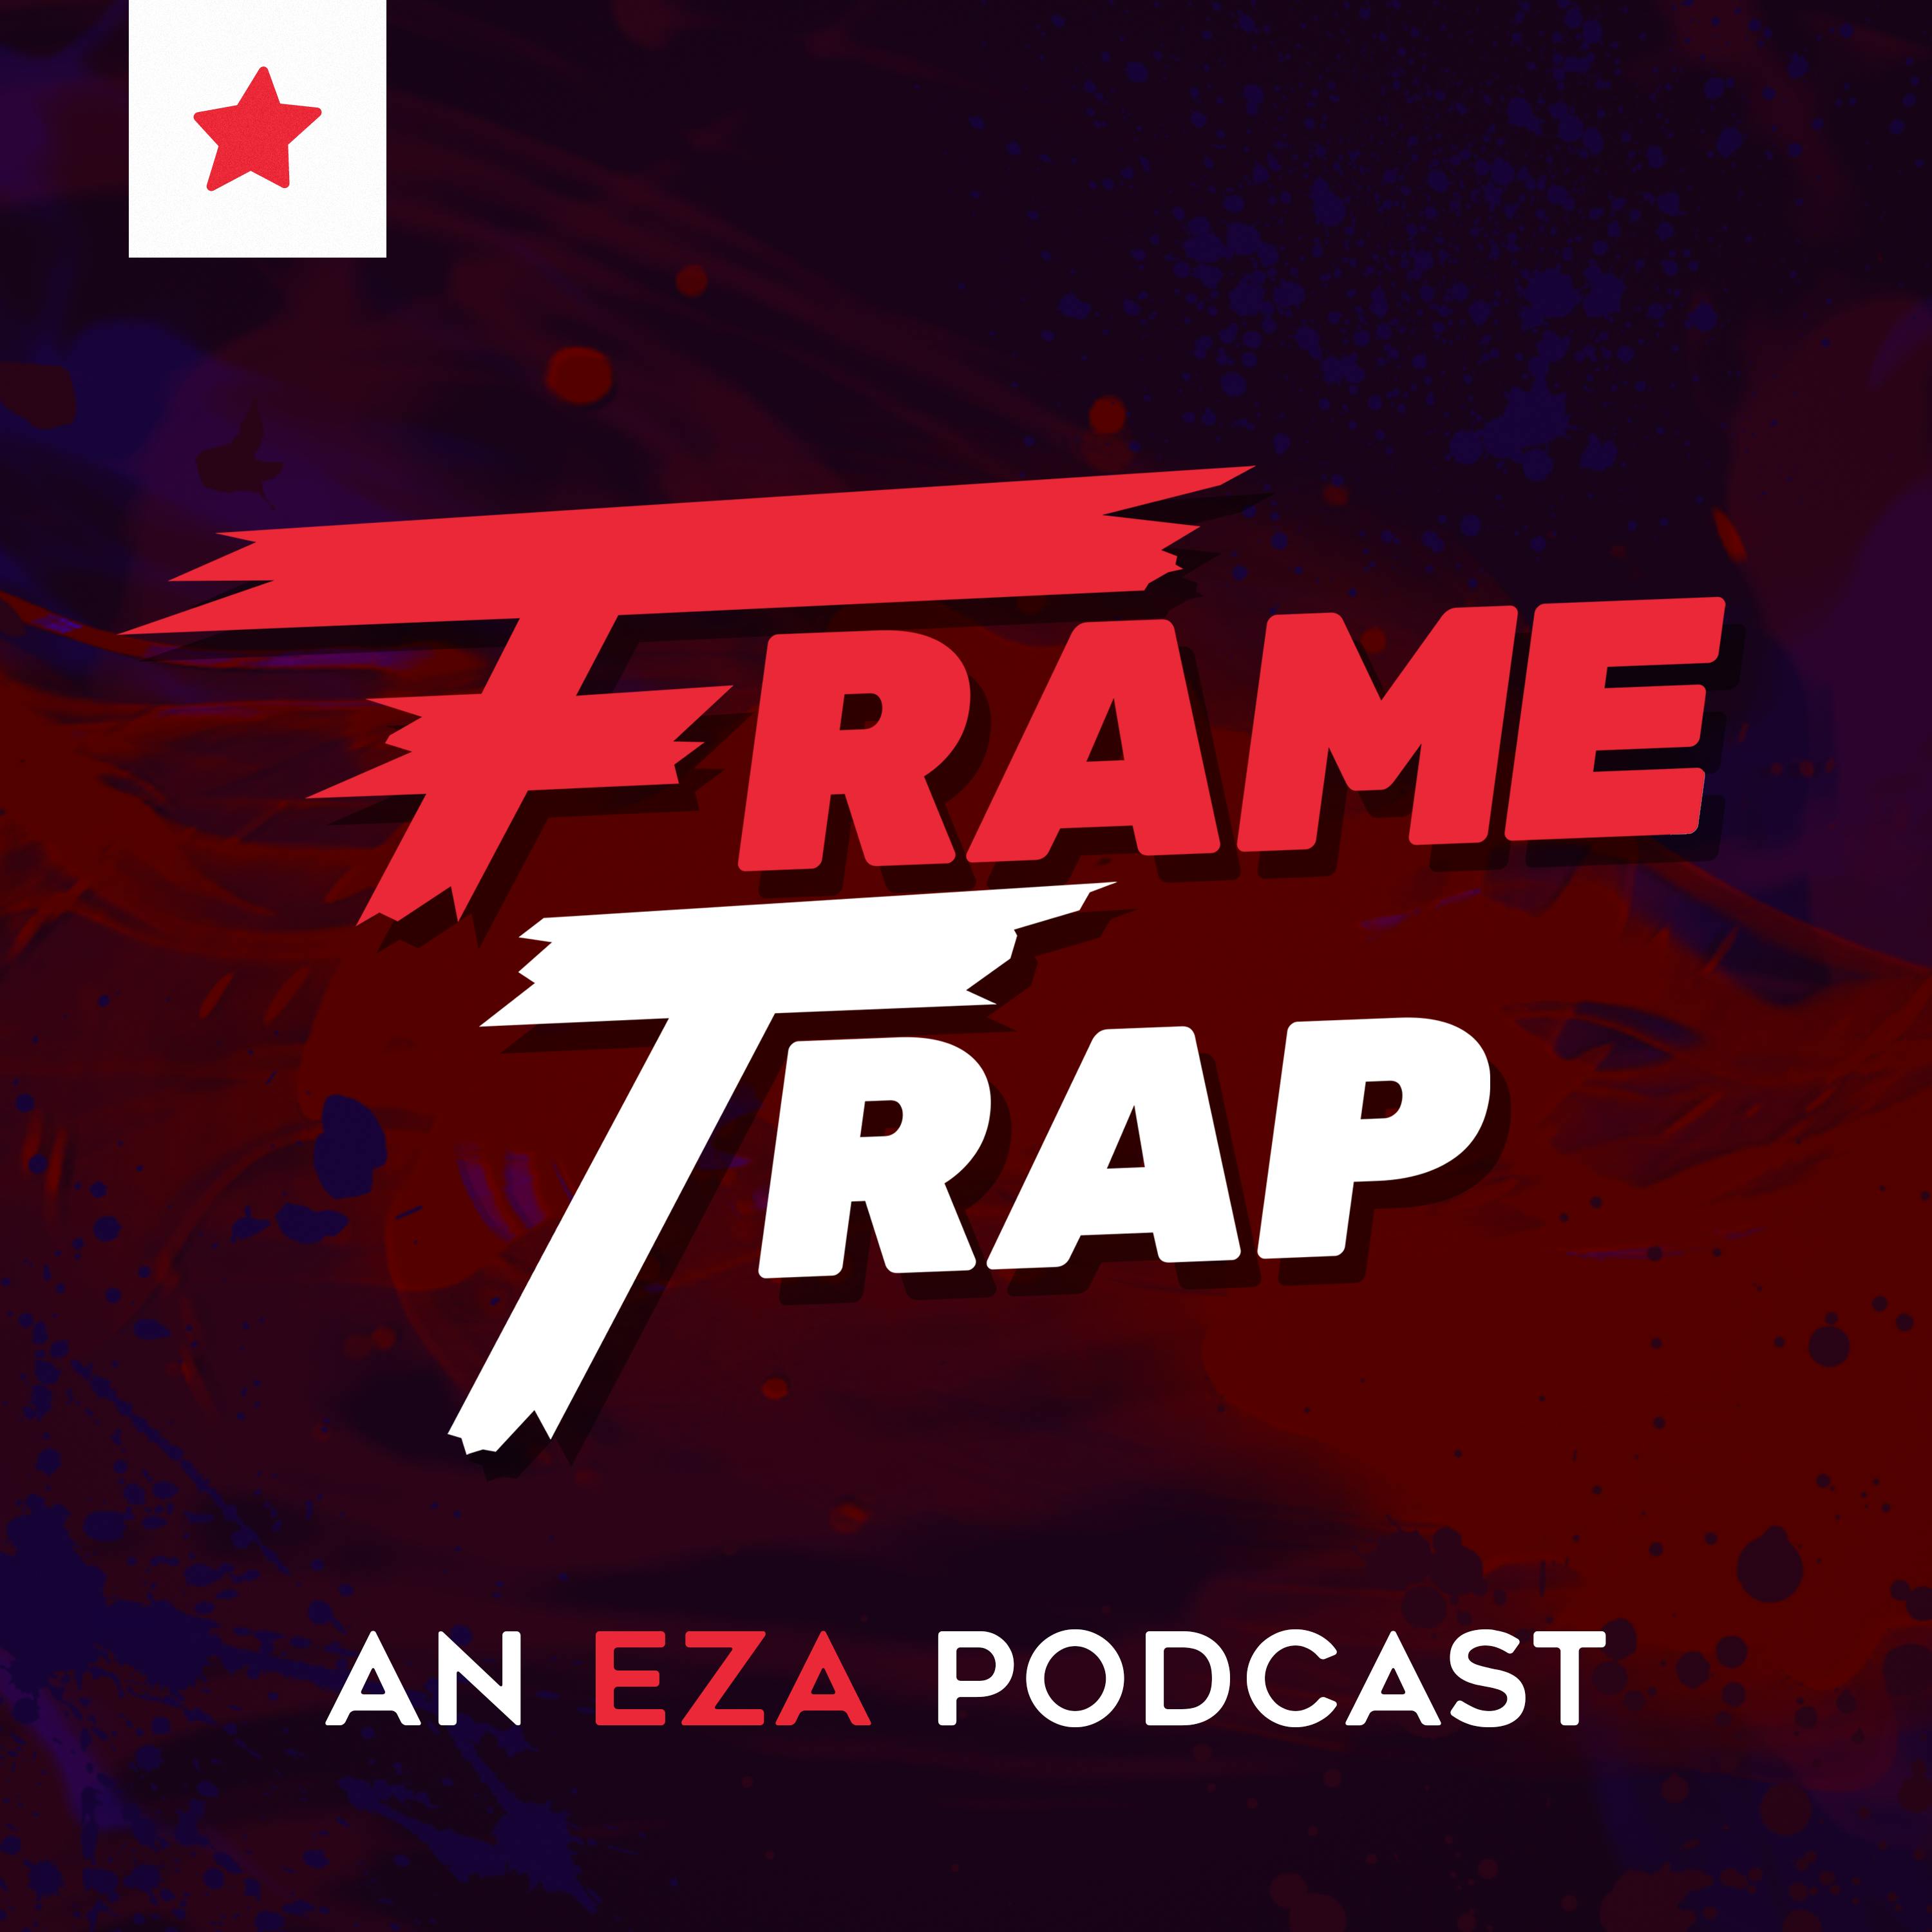 Frame Trap - Episode 193 ” Fast Cars & Lies of P